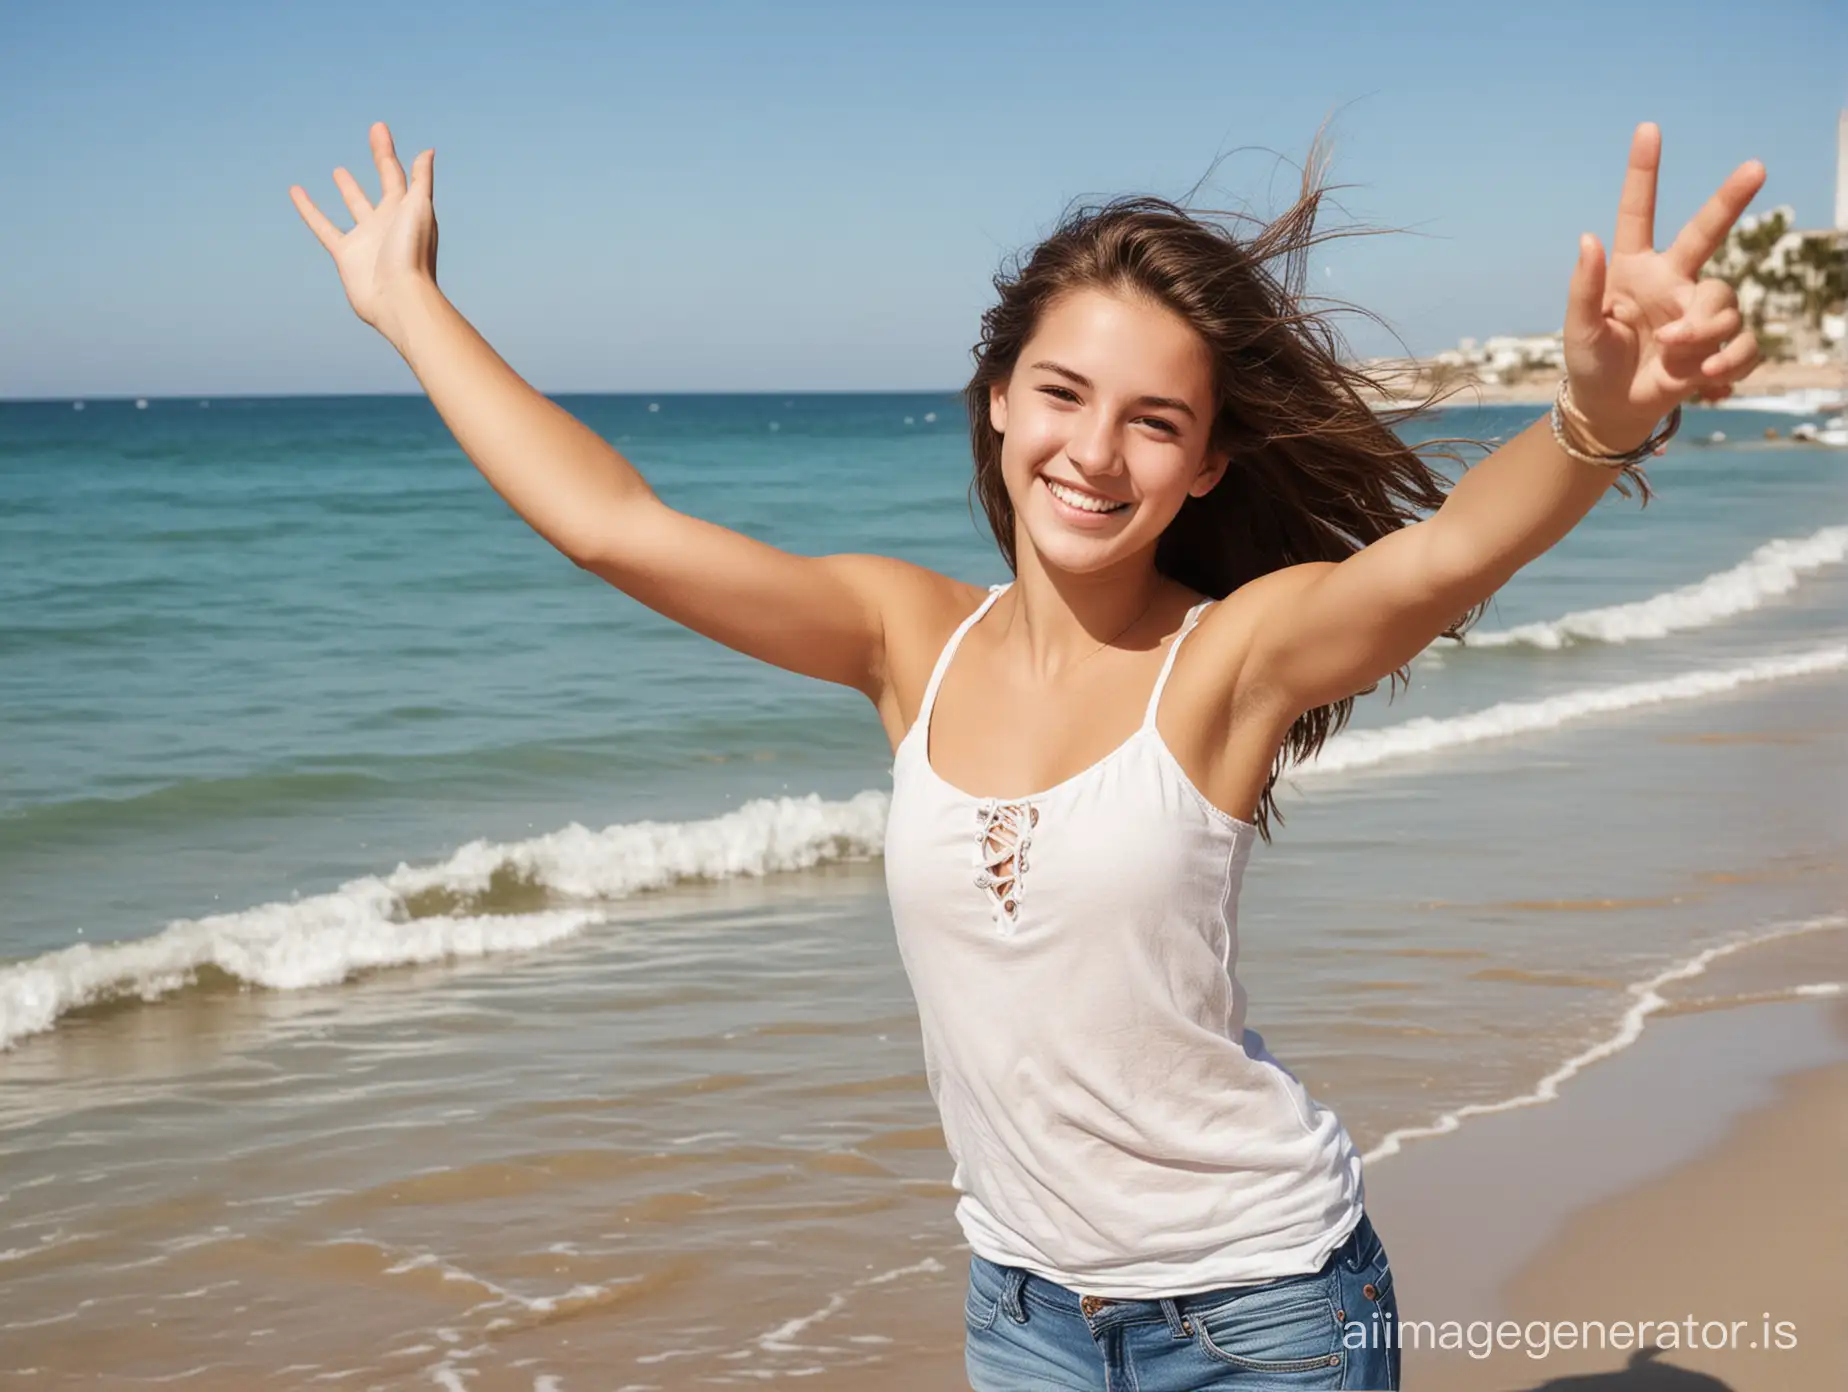 A 17 years old Teenager Girl at beach, Happy